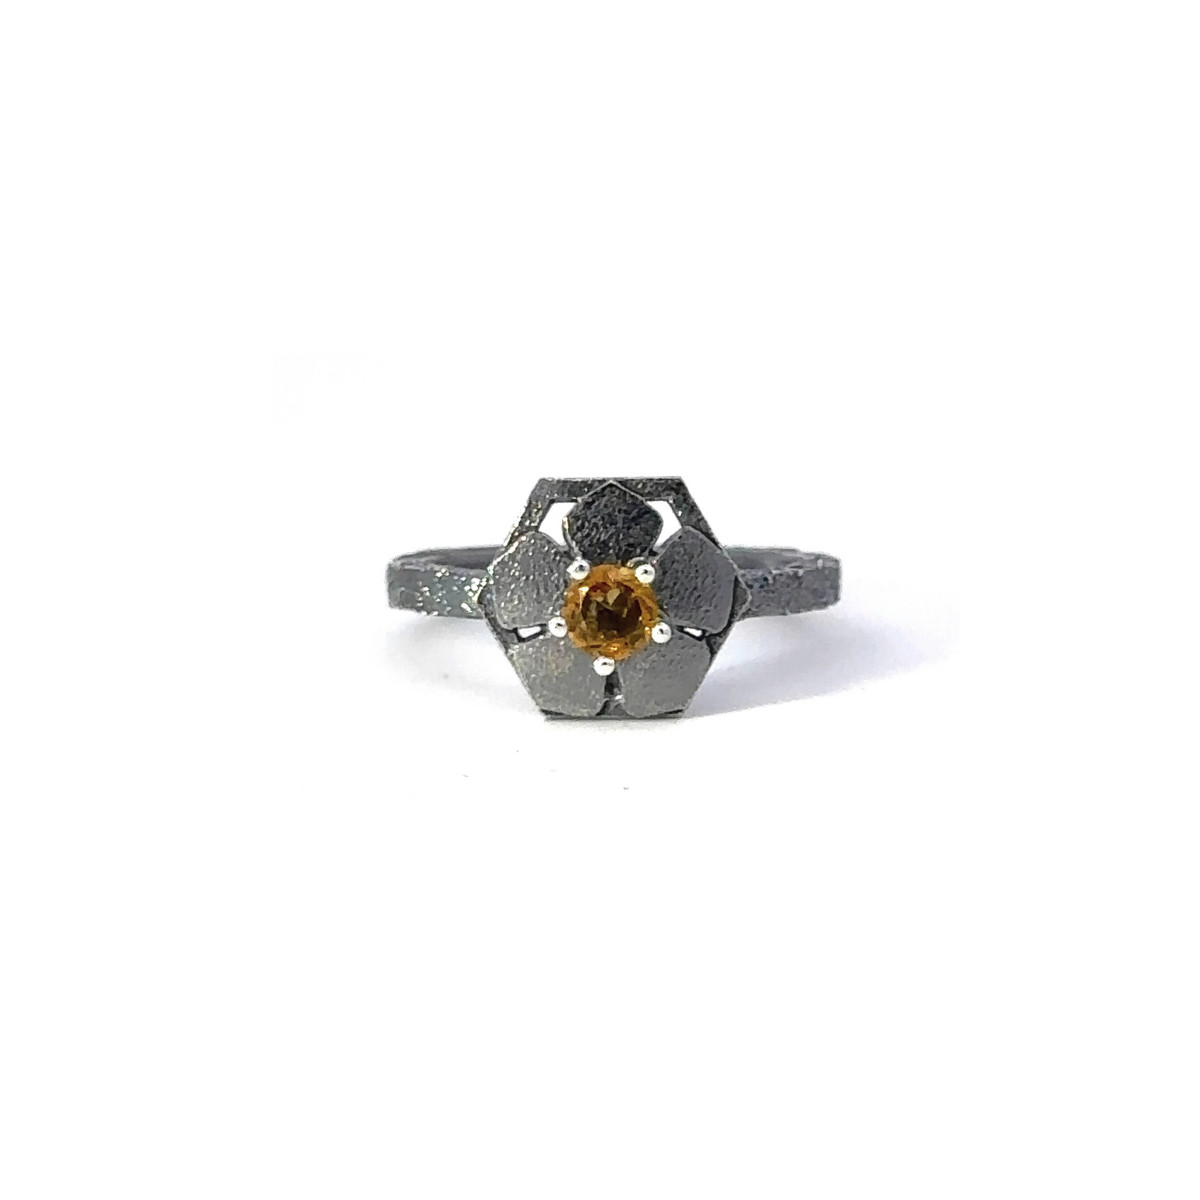 Silver and citrine ring